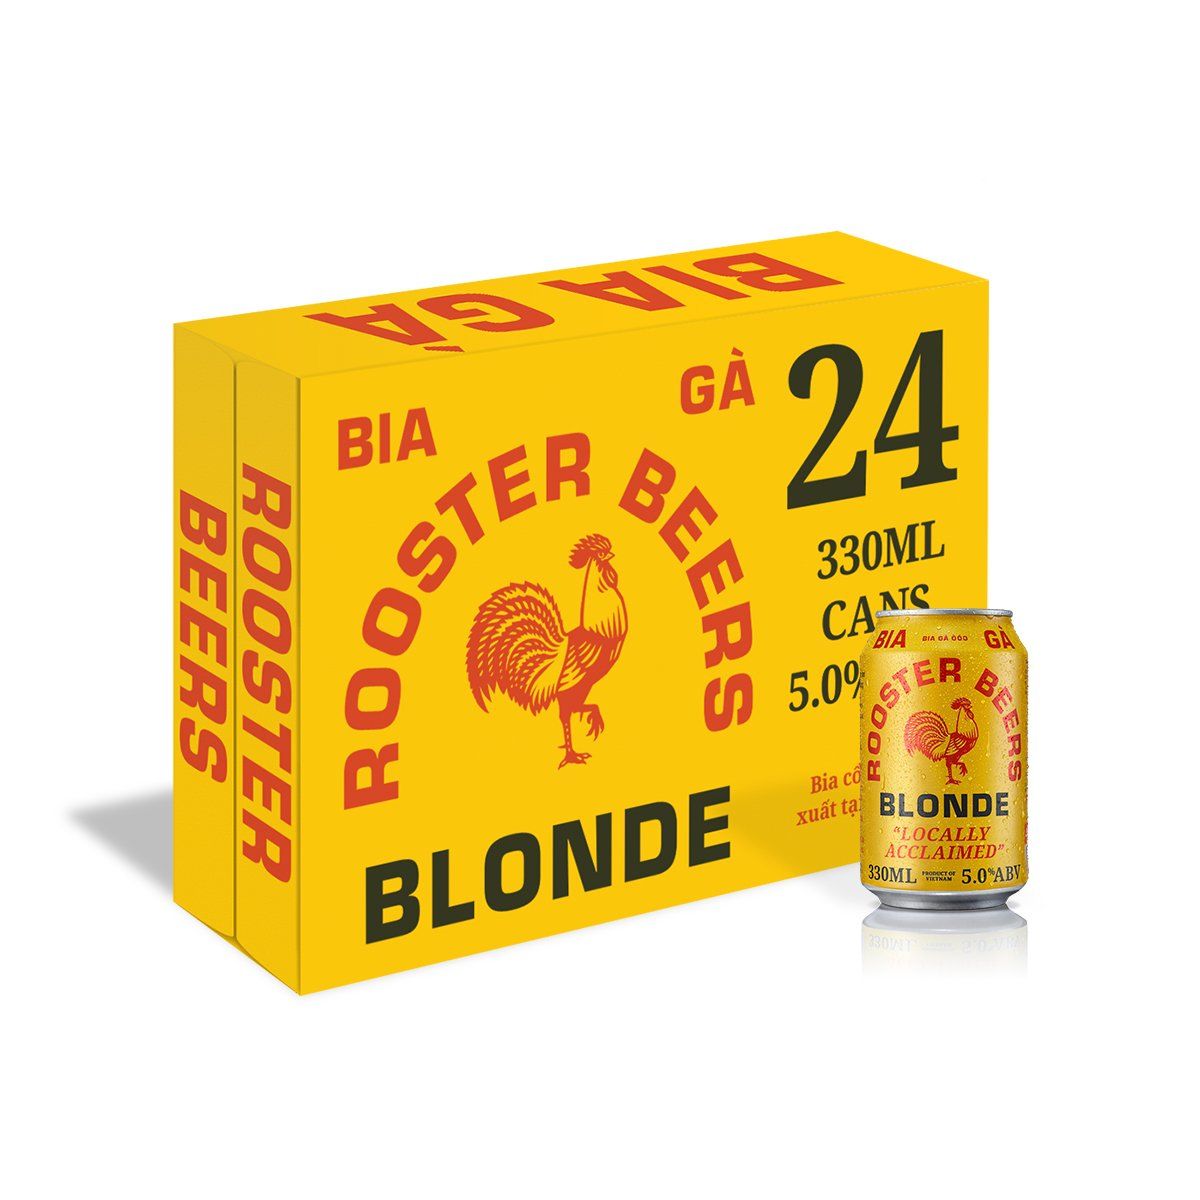  [TẶNG 2 LY] Rooster Beers Blonde - Thùng 24 Lon (330ml) 